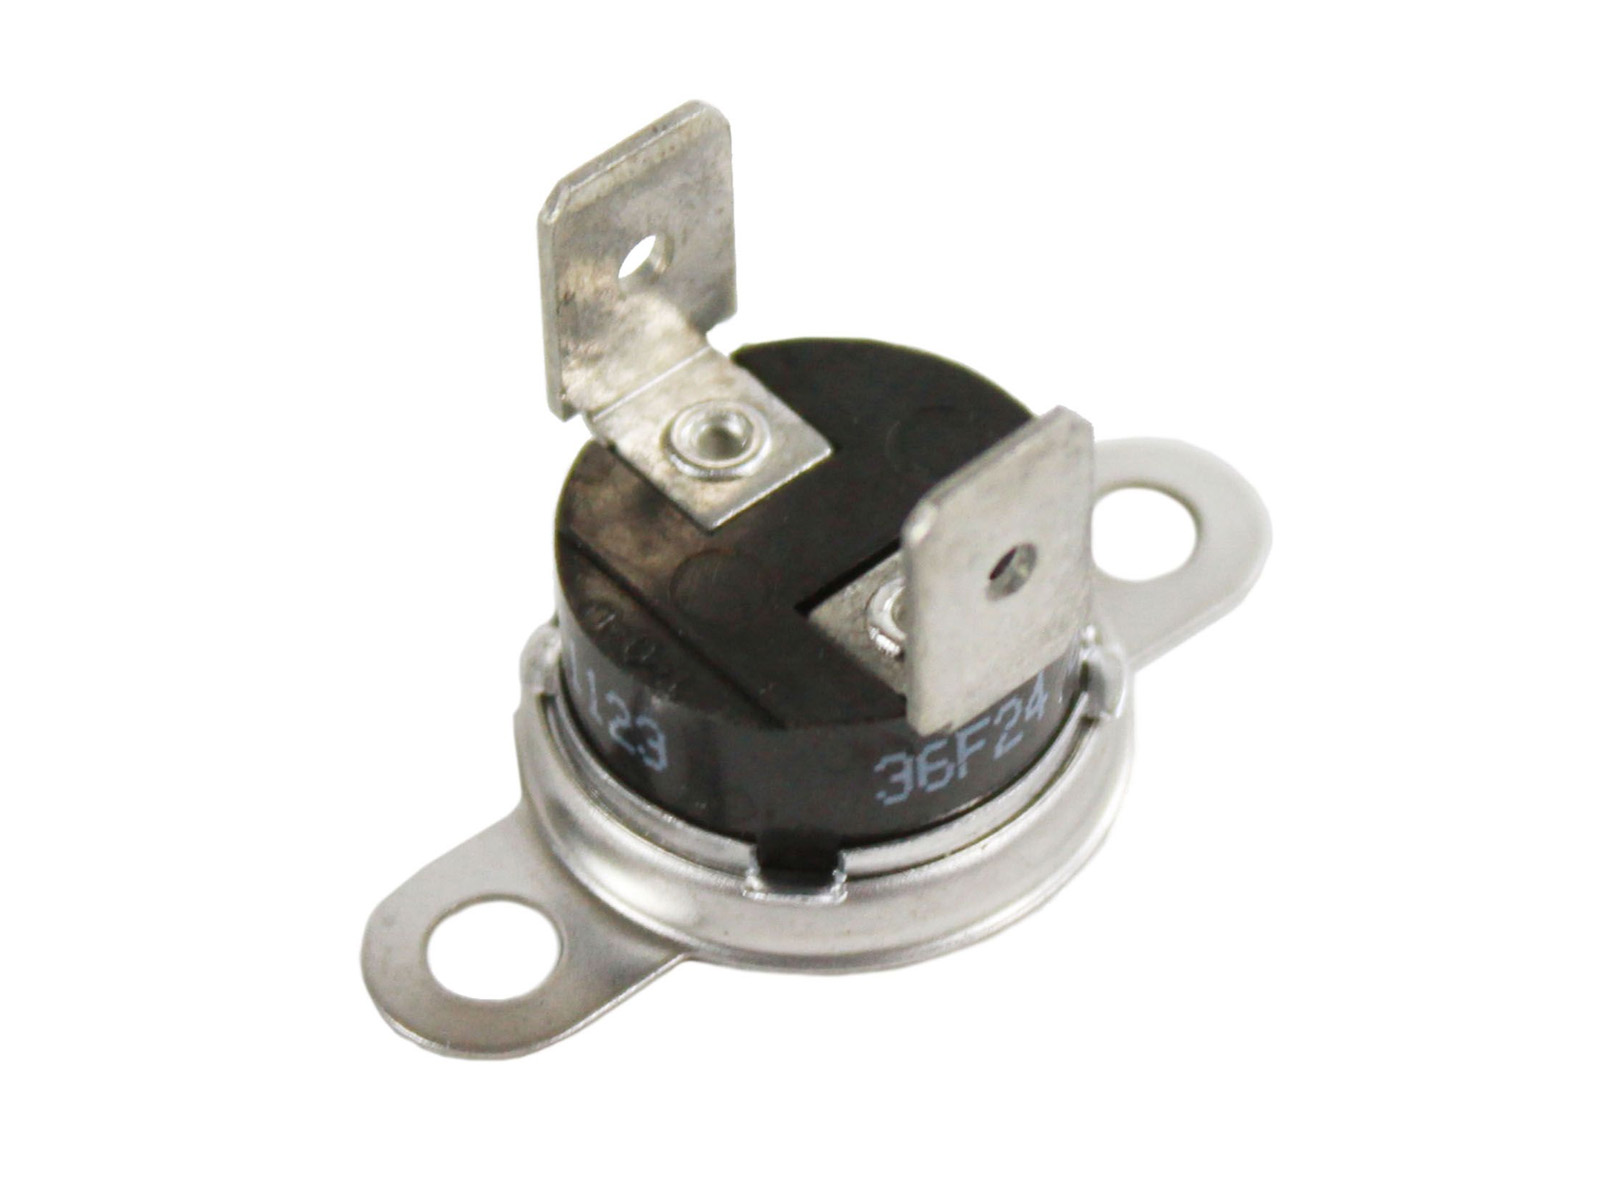 ClimaTek Upgraded Dryer Thermal Limit Switch fits Sears 146062-00 146062-000 1489053